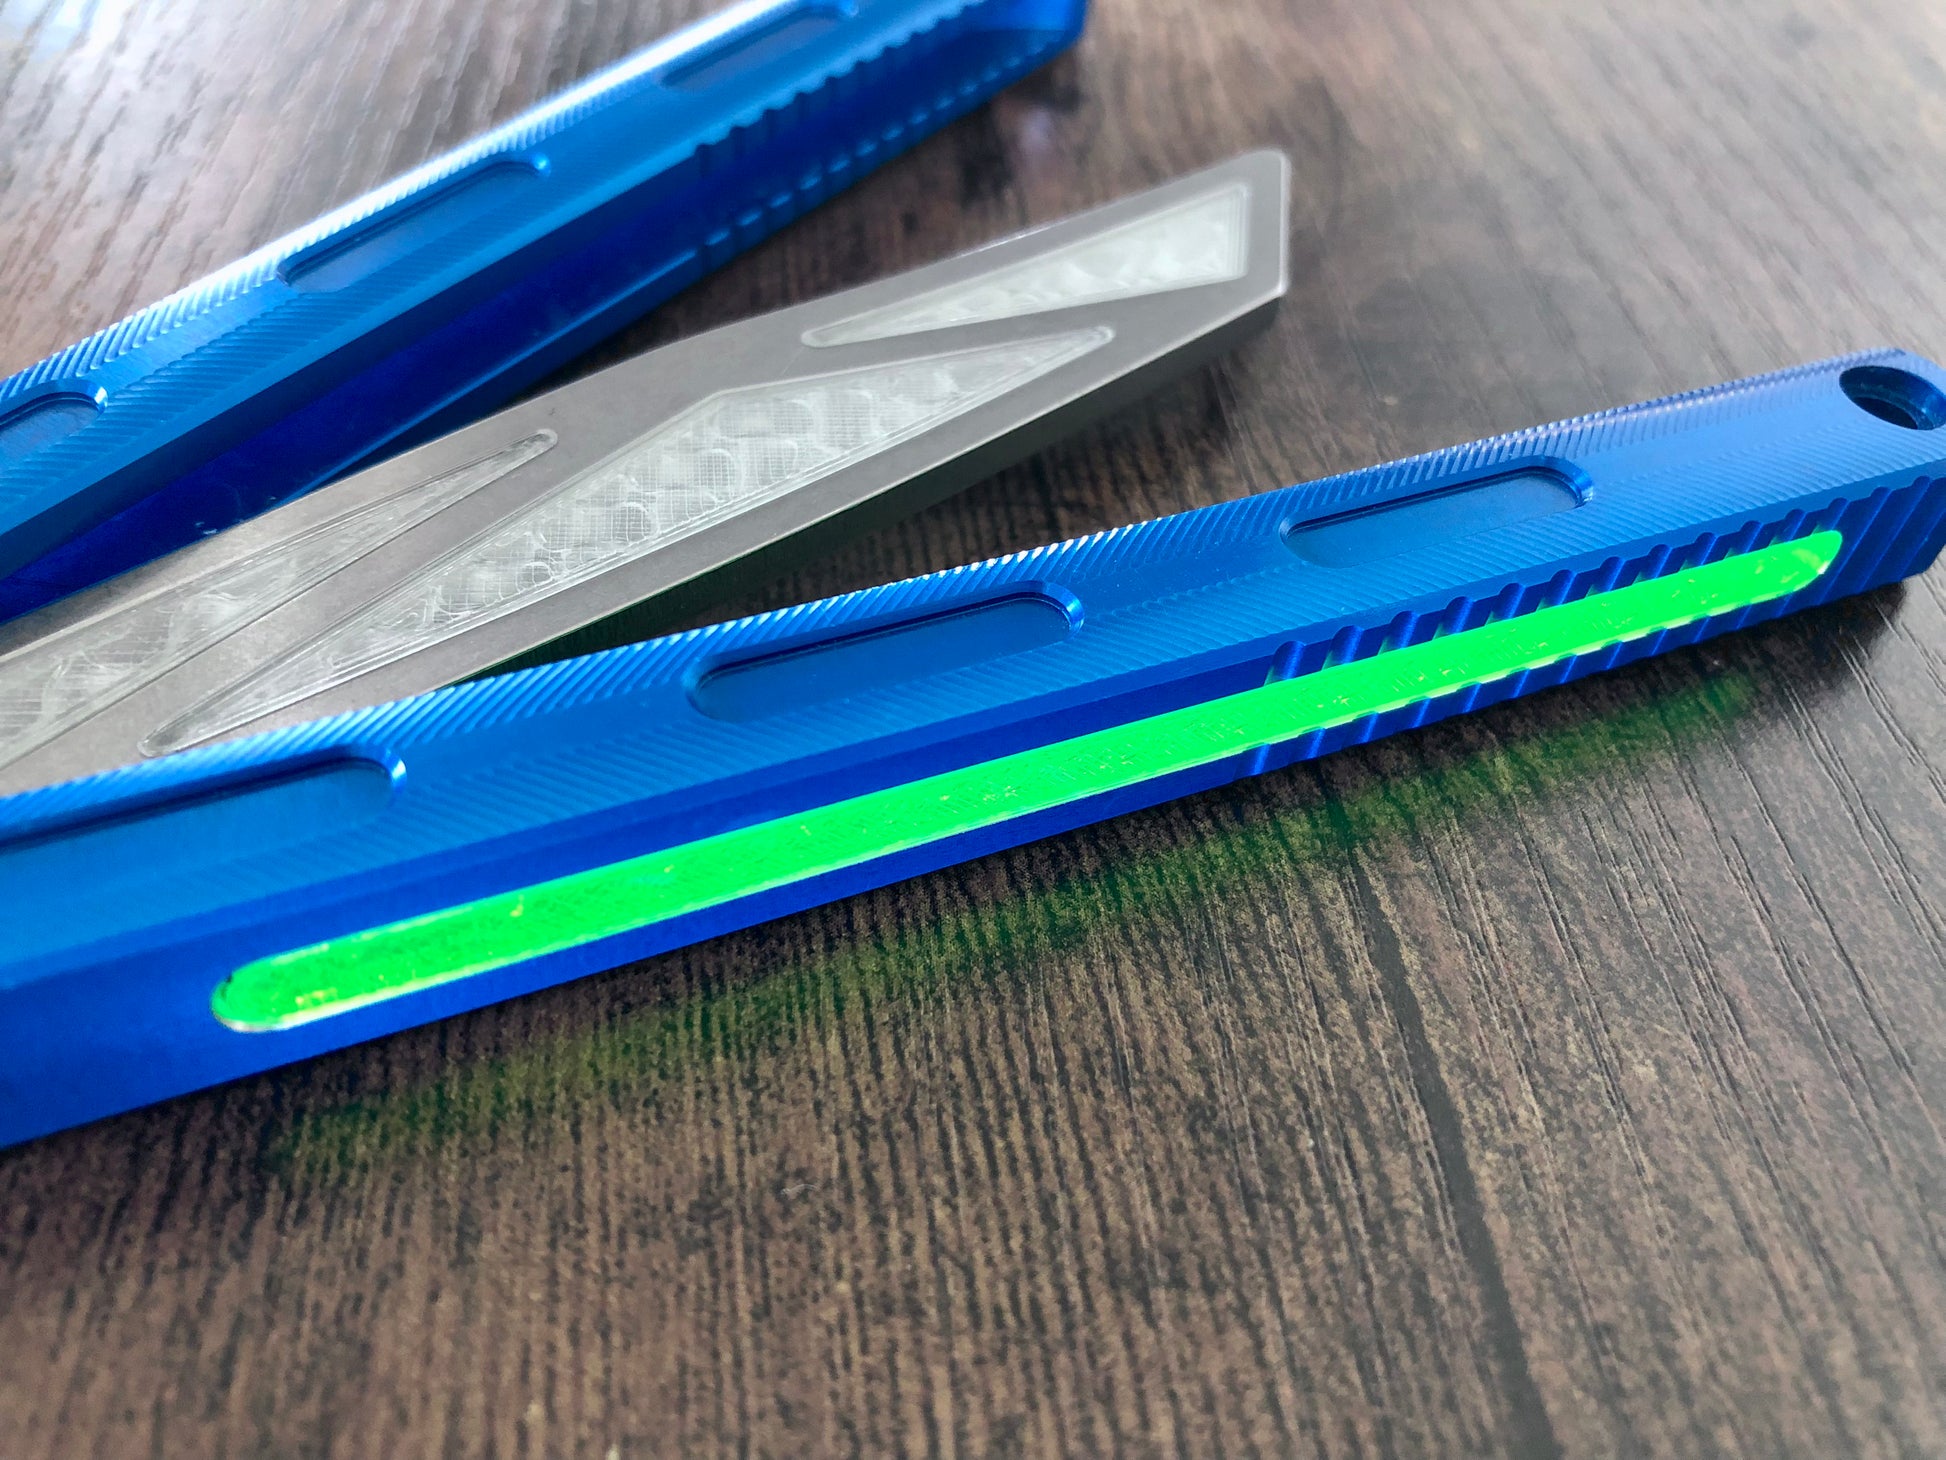 Add a pop of color and silence the ring of your MachineWise Prysma, Prysma Pro, or SlifT balisongs with these these polyurethane Zippy Speed Channel inlays.